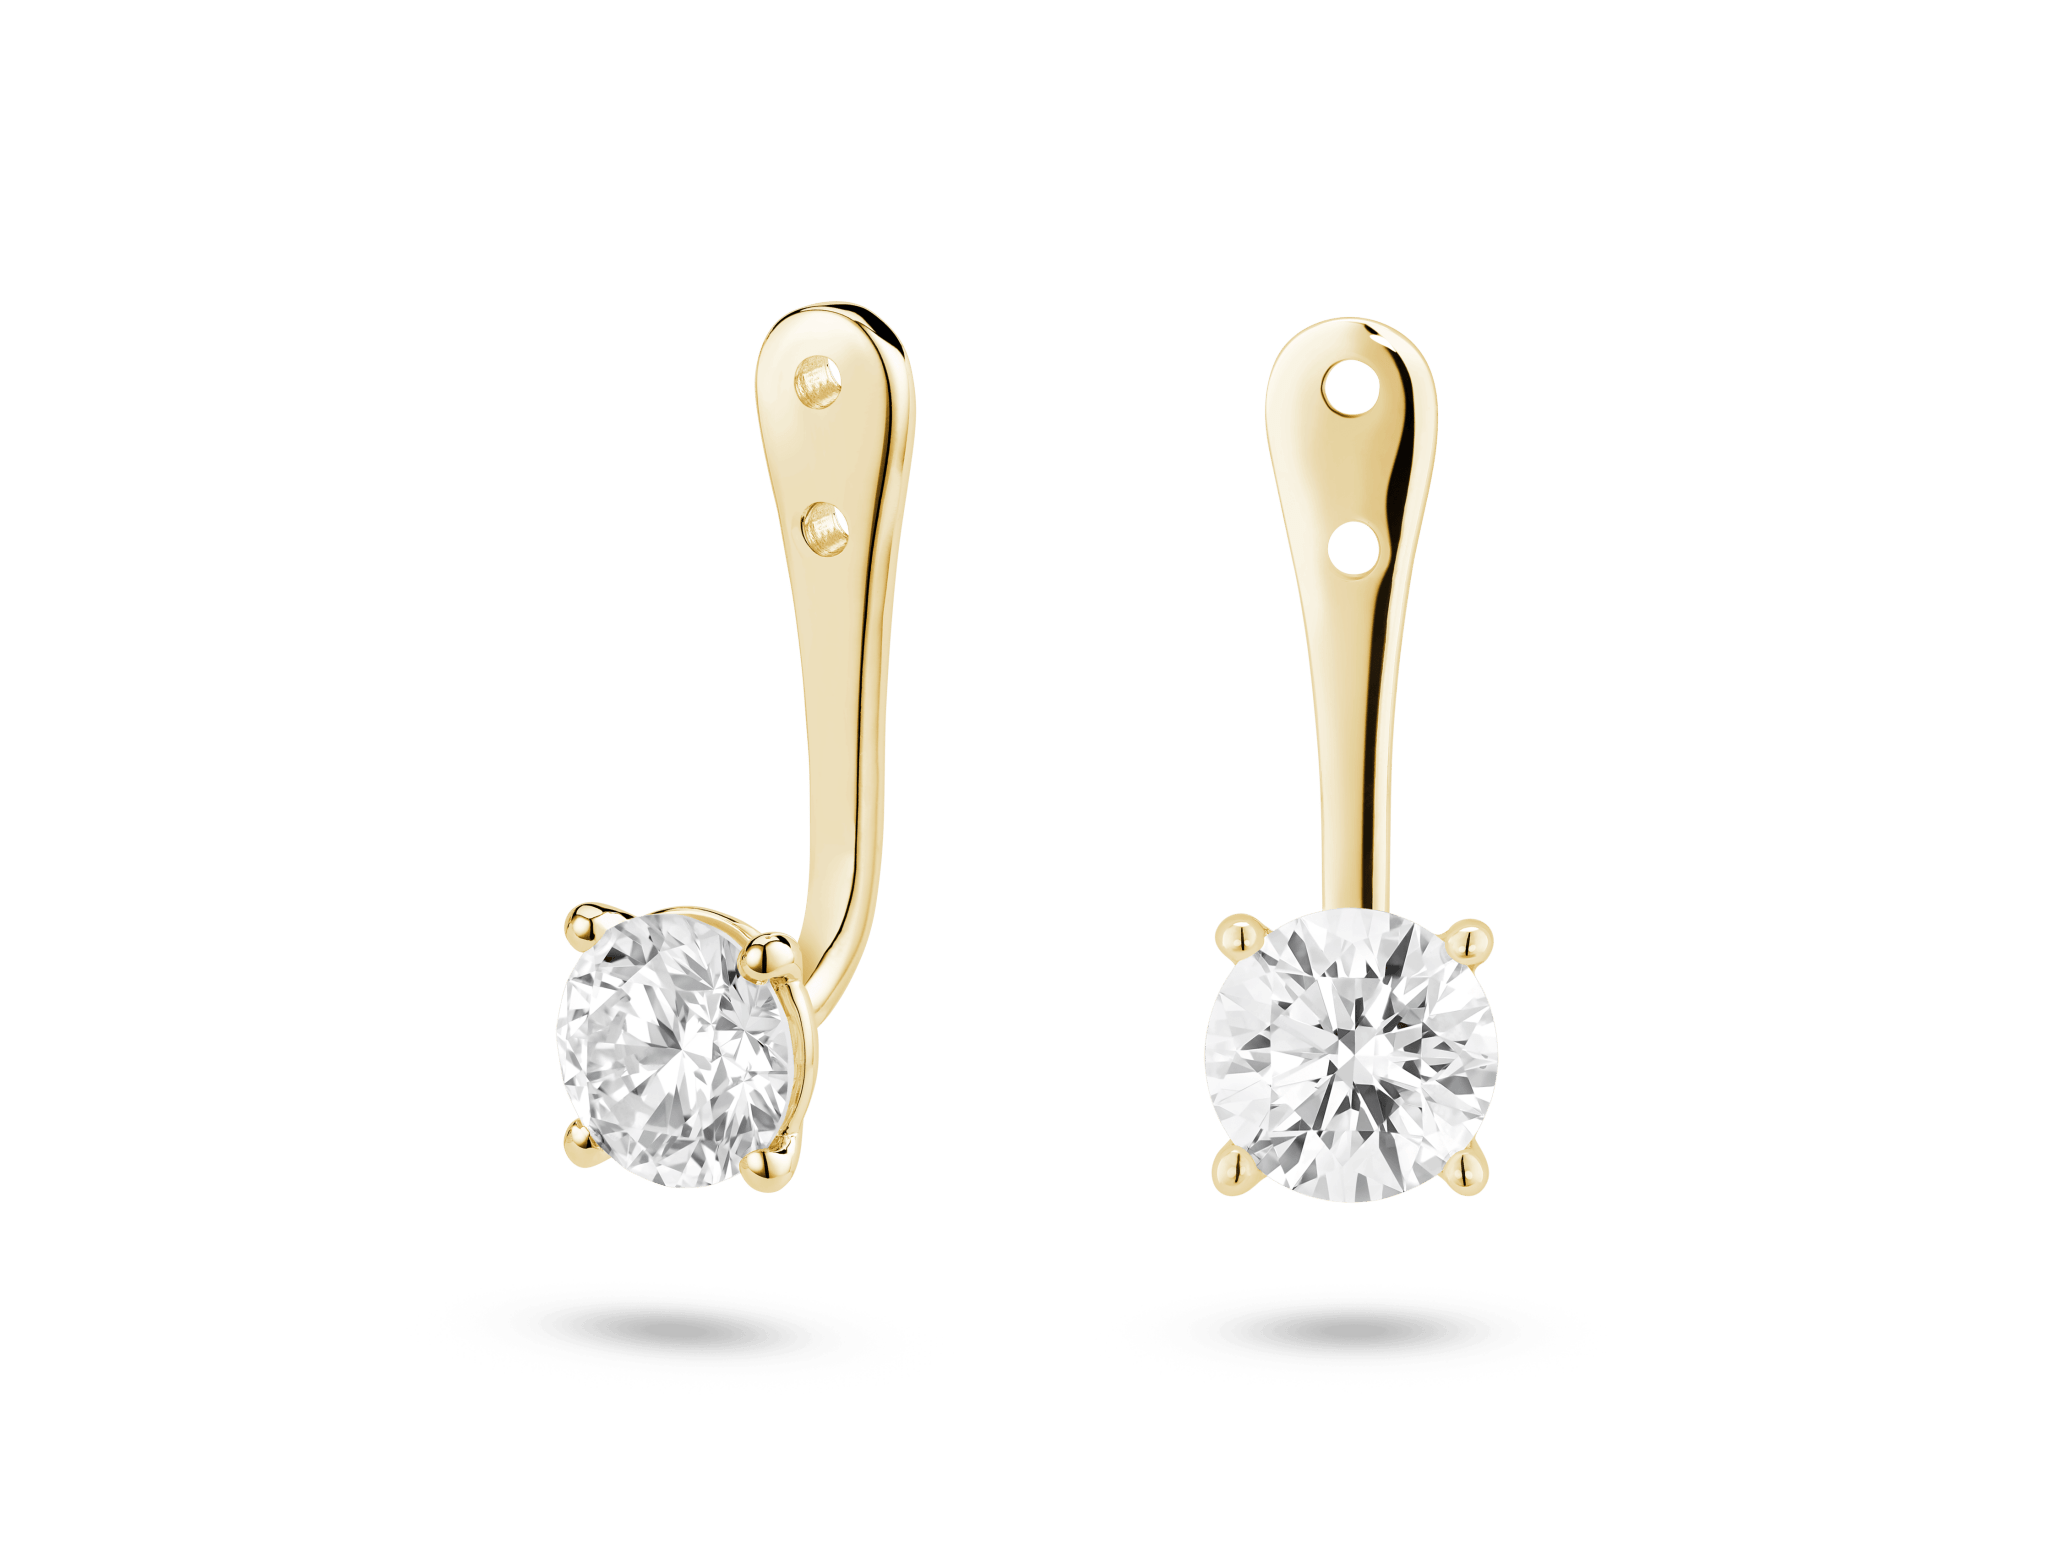 Lab-Grown Diamond 1ct. tw. Round Brilliant Solitaire Ear Jacket Earrings | White - #Lightbox Jewelry#